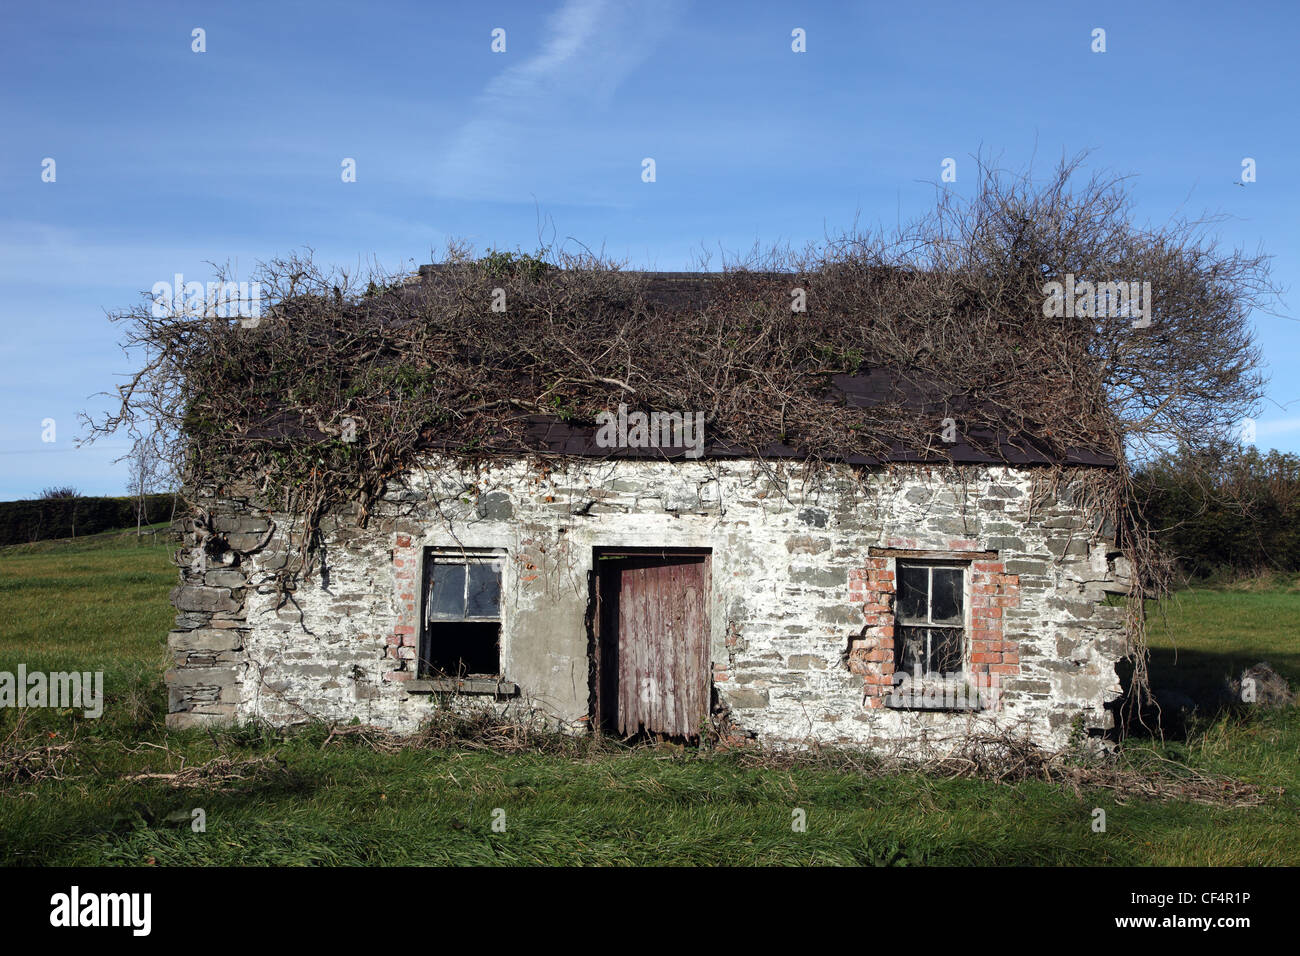 Derelict cottage, typical of homesteads abandoned during the Great Famine in the 19th Century. Stock Photo